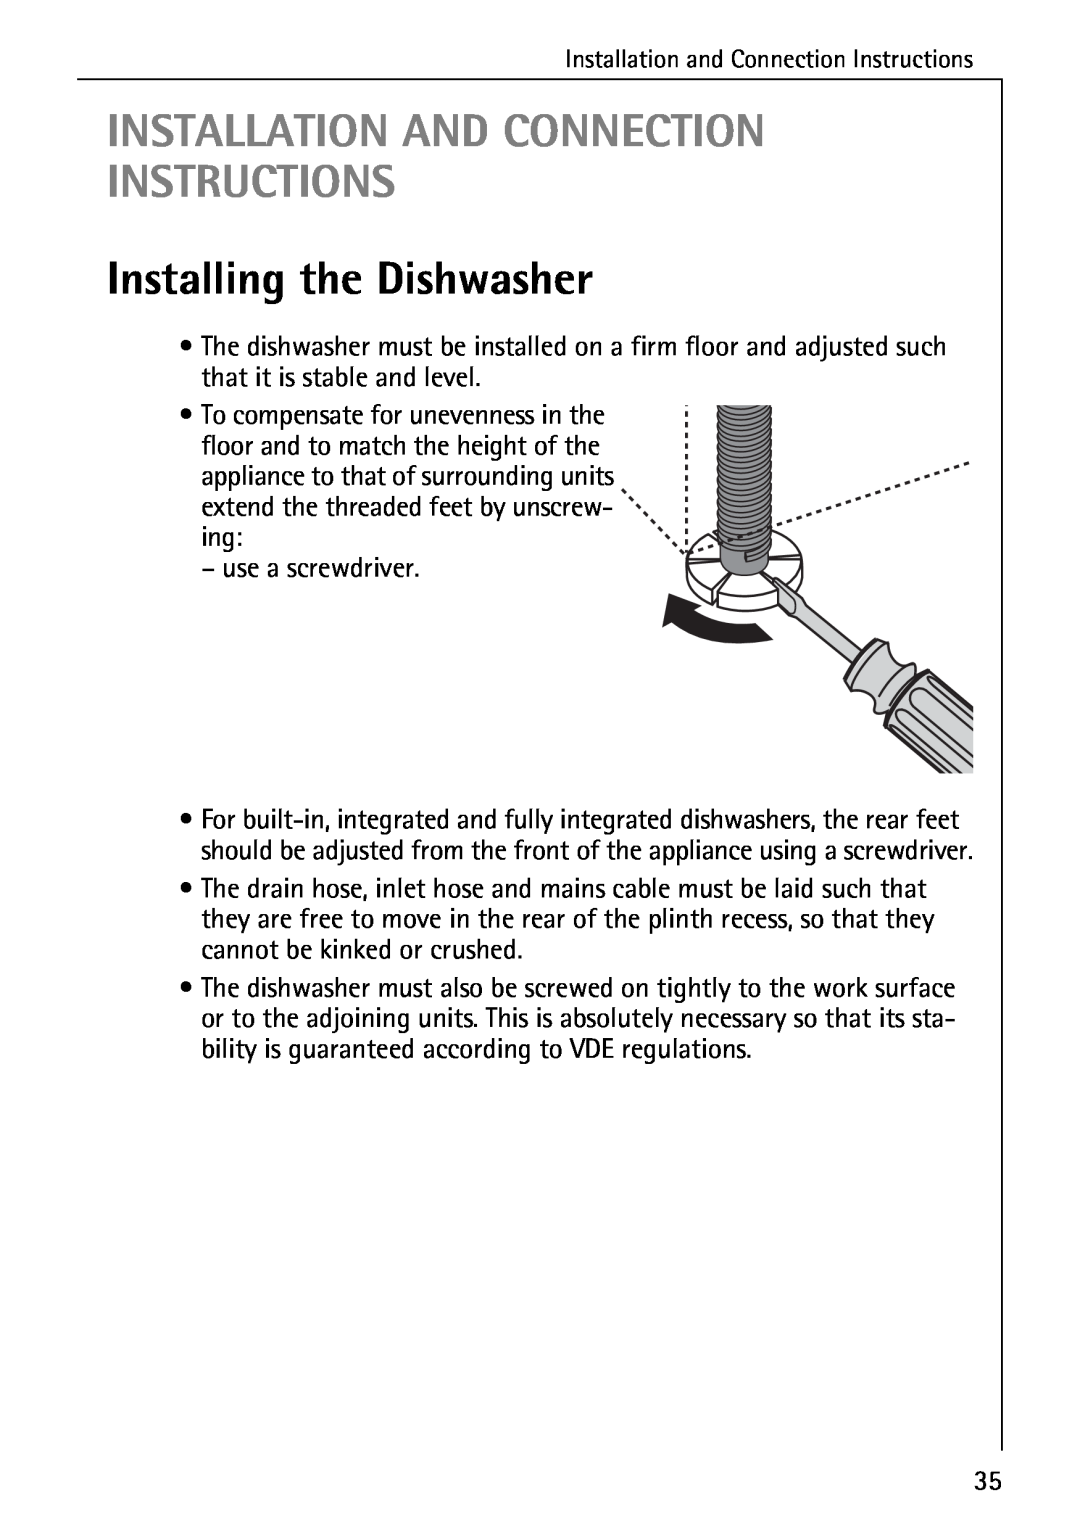 AEG 50760 I manual Installation And Connection Instructions, Installing the Dishwasher 